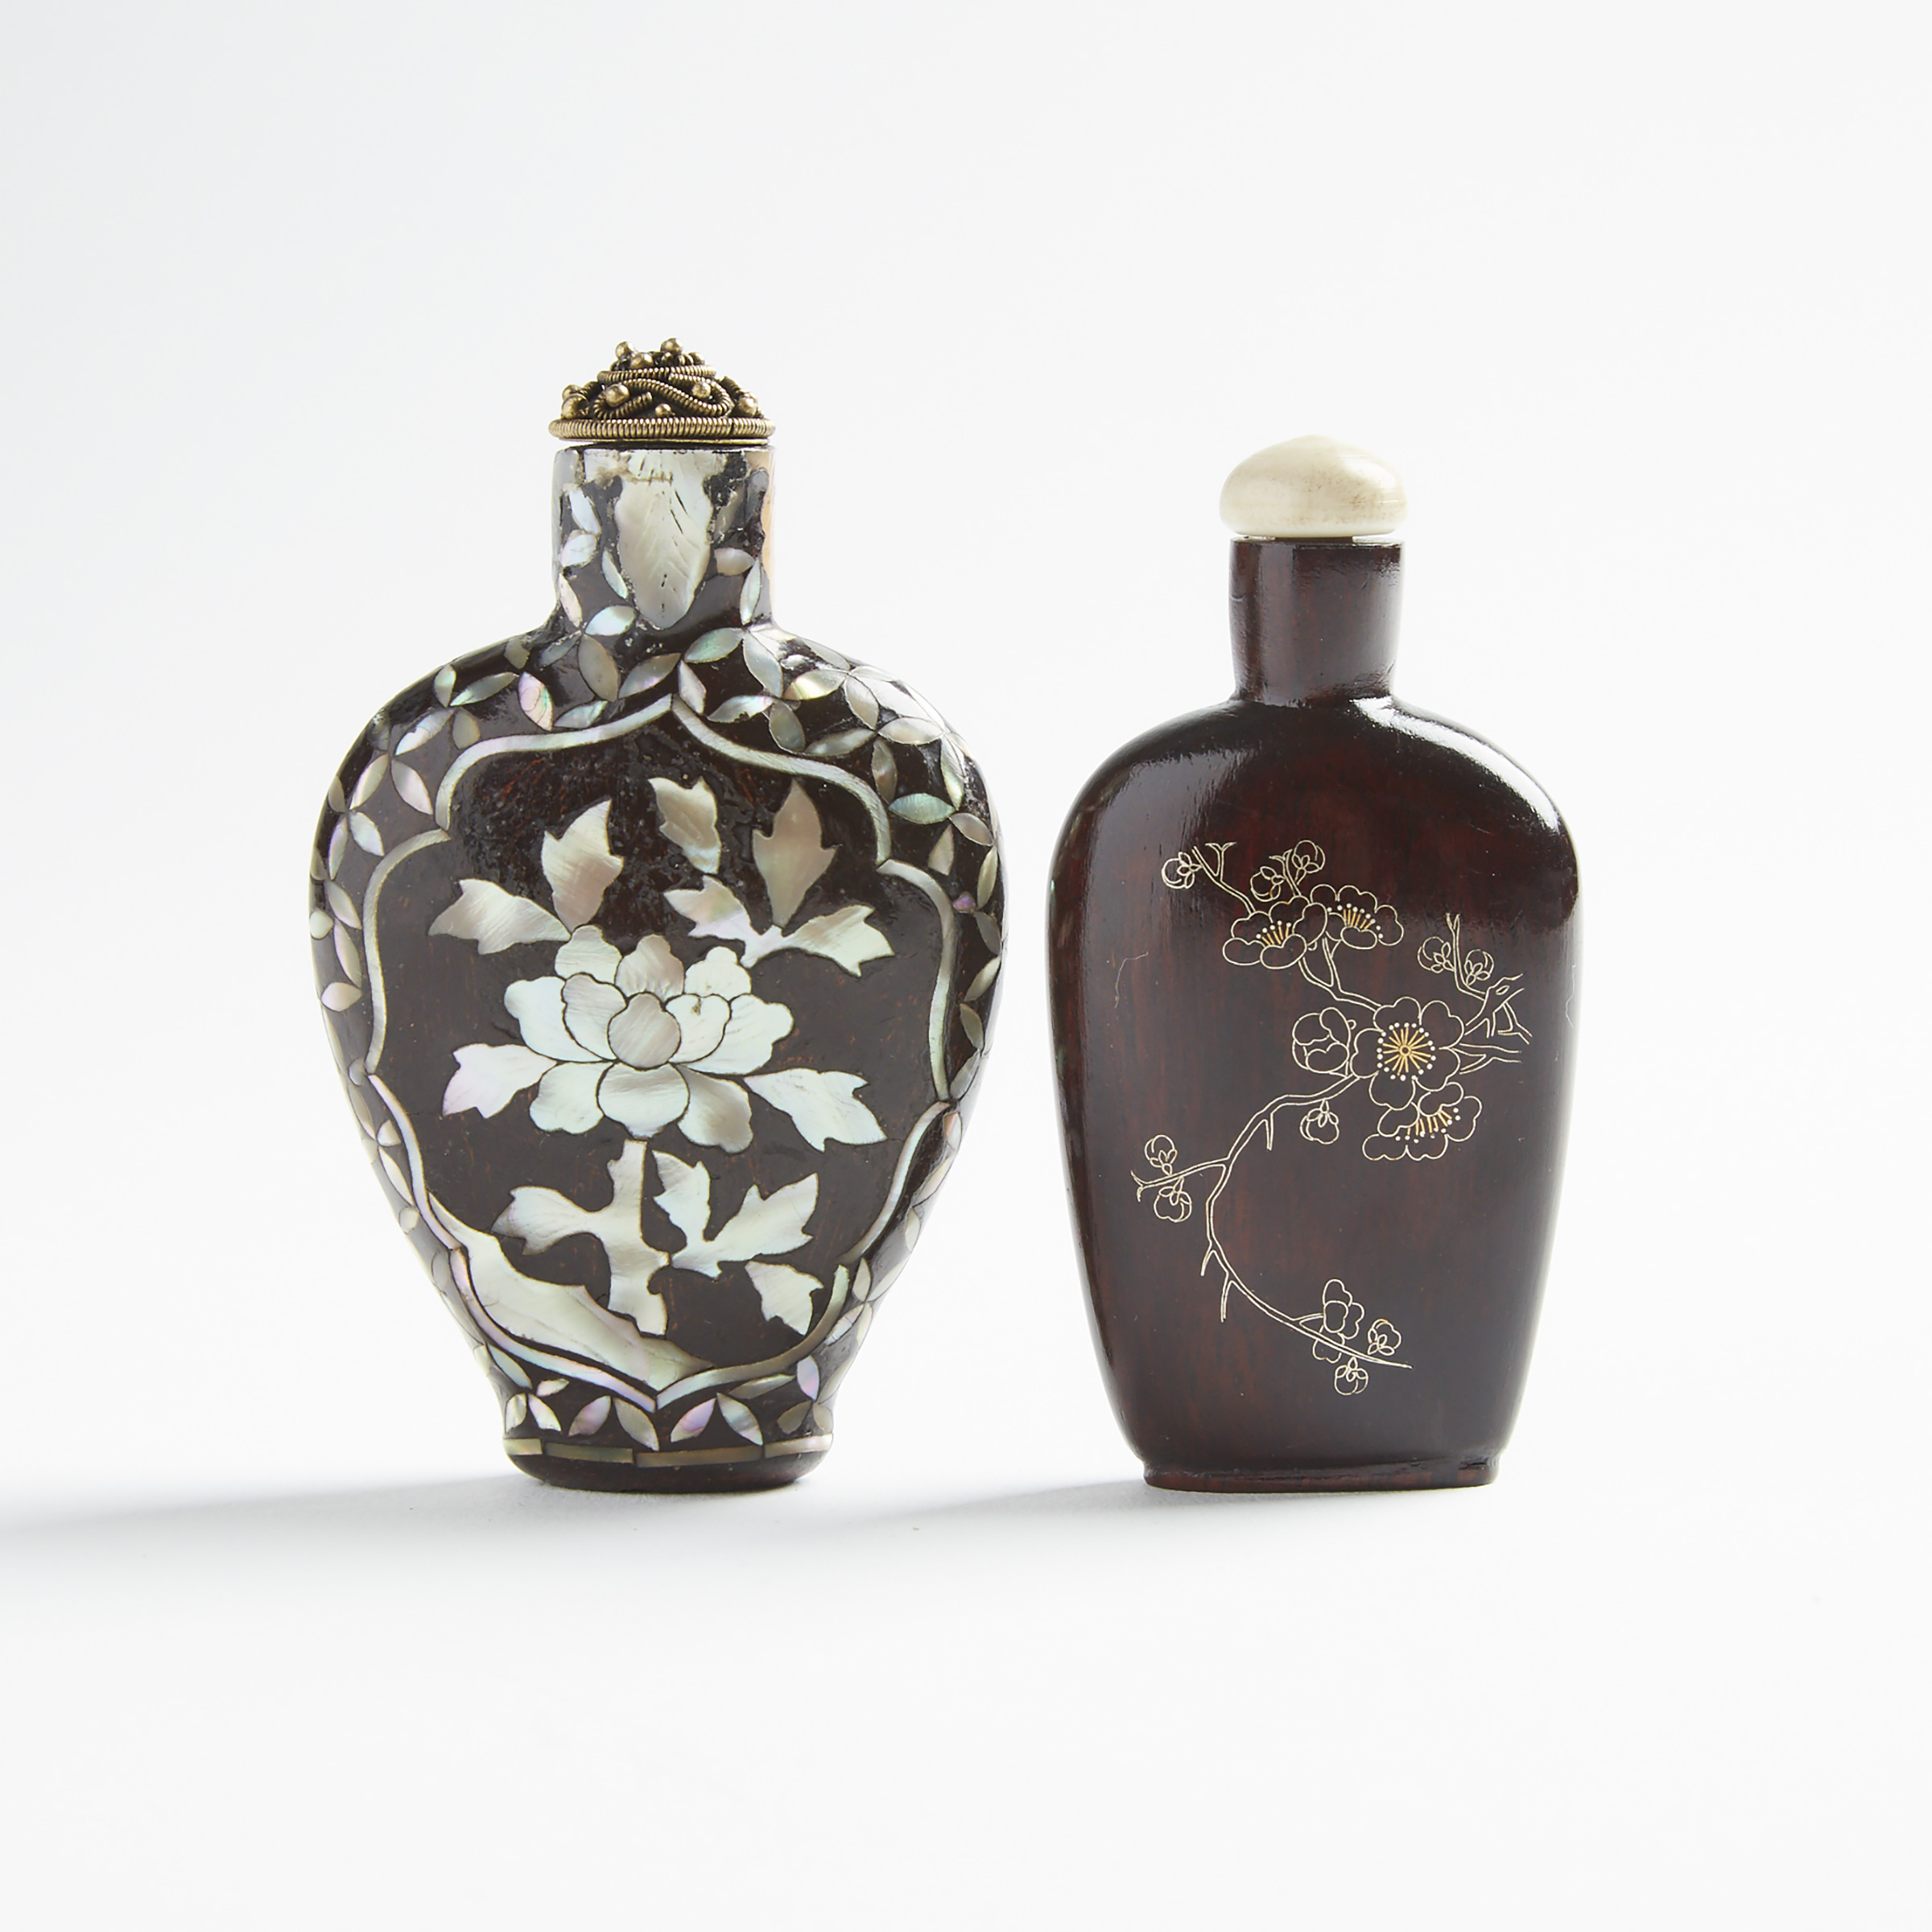 Two Inlaid Wood Snuff Bottles, 19th/20th Century